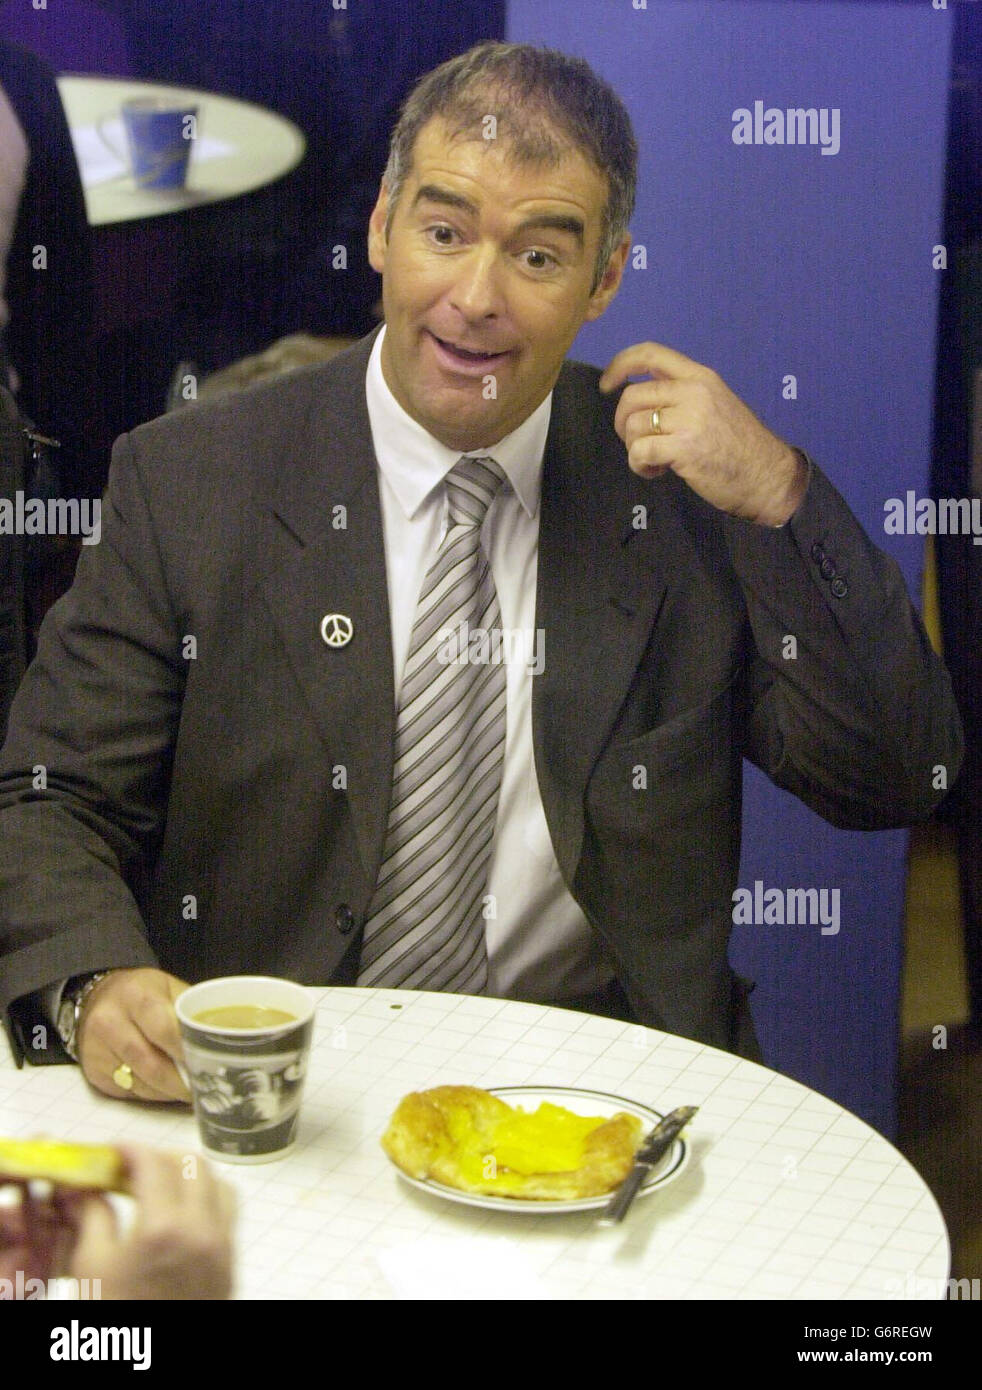 Scottish Socialist Party leader Tommy Sheridan enjoys a cup of tea and a pastry at the Purple Haze Cafe in Edinburgh, where the Scottish Cannabis Coffeeshop Movement (SCCM) had invited people to openly use cannabis. Mr Sheridan called on police to turn a blind eye to the use of cannabis - which he said was no more a crime than doing a jigsaw - as the drug was officially downgraded to class C. Stock Photo